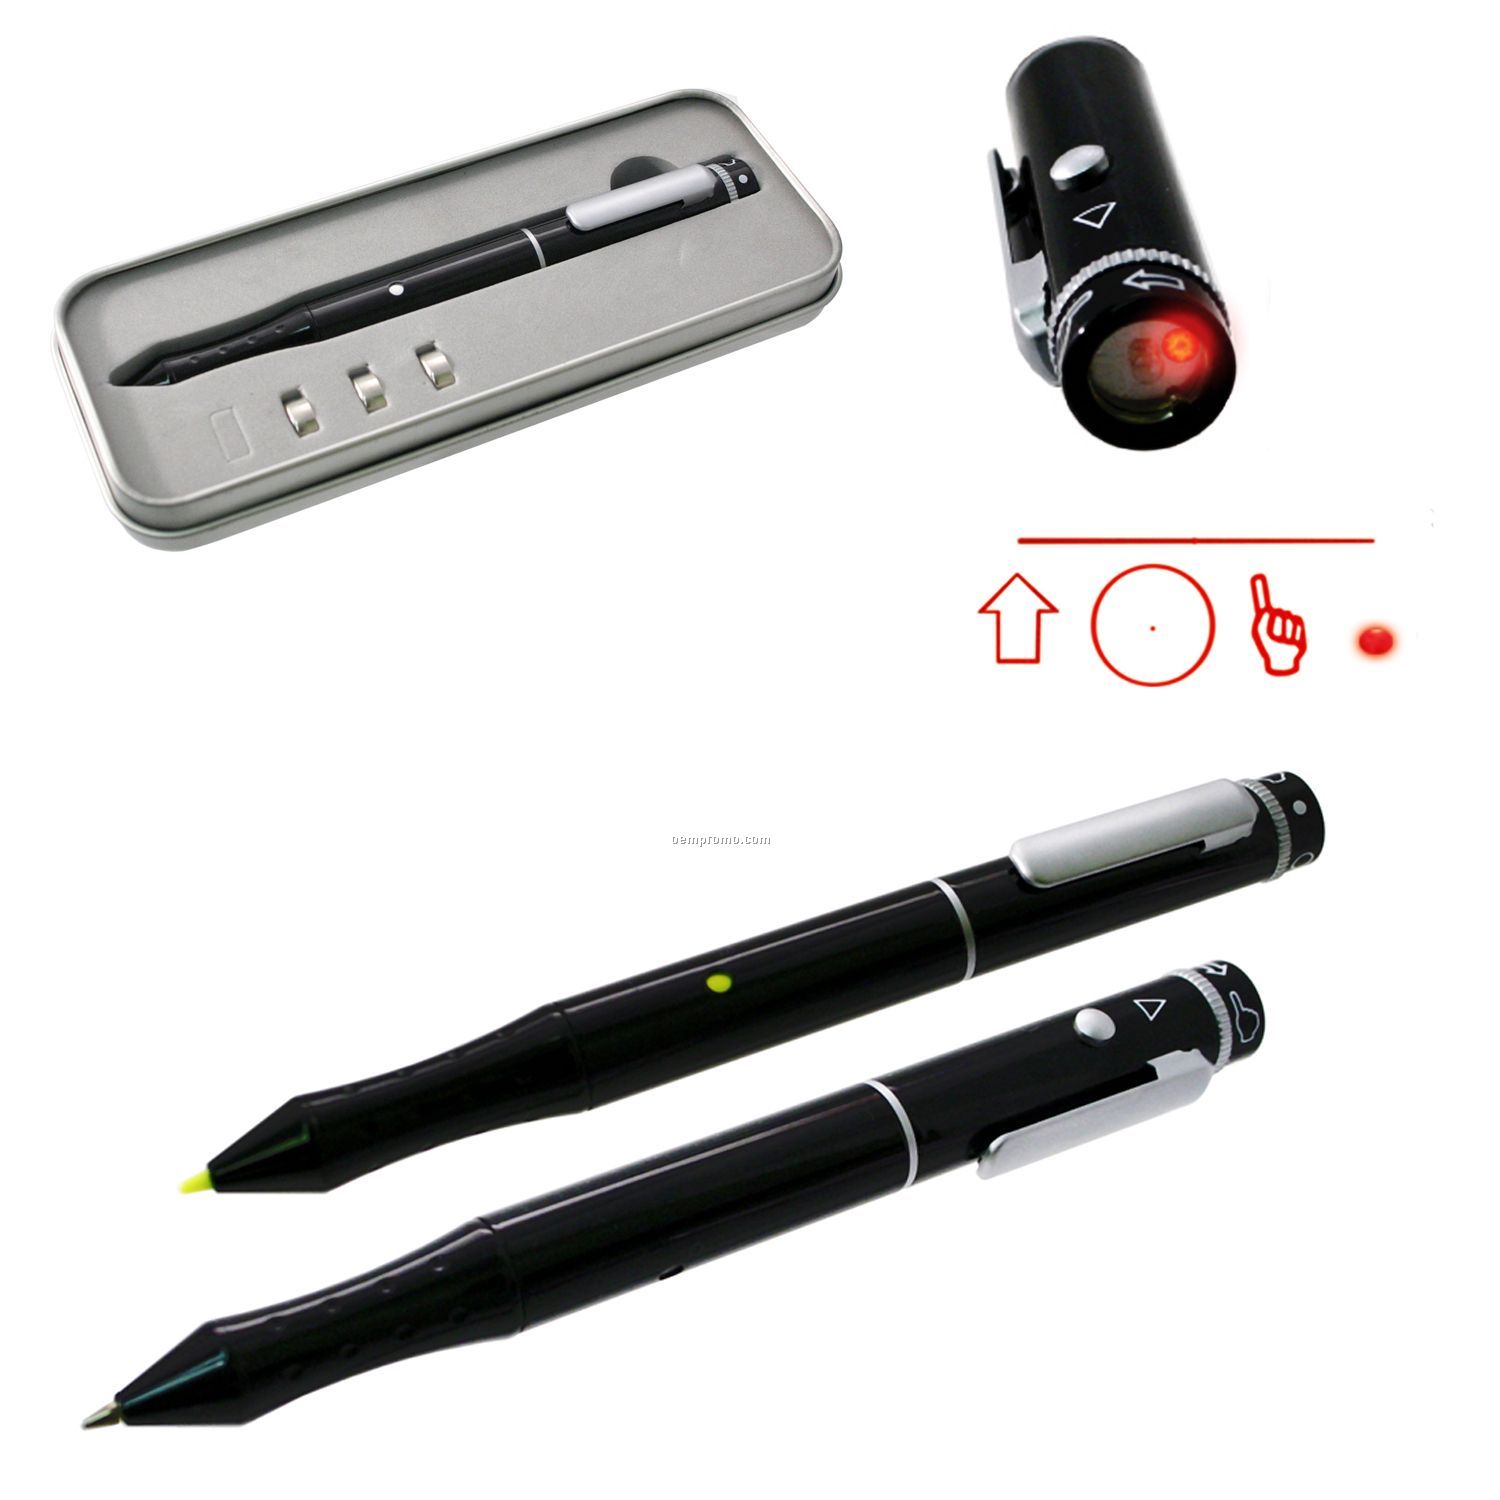 Laser Pointer In Black & Silver With Pen And Stylus